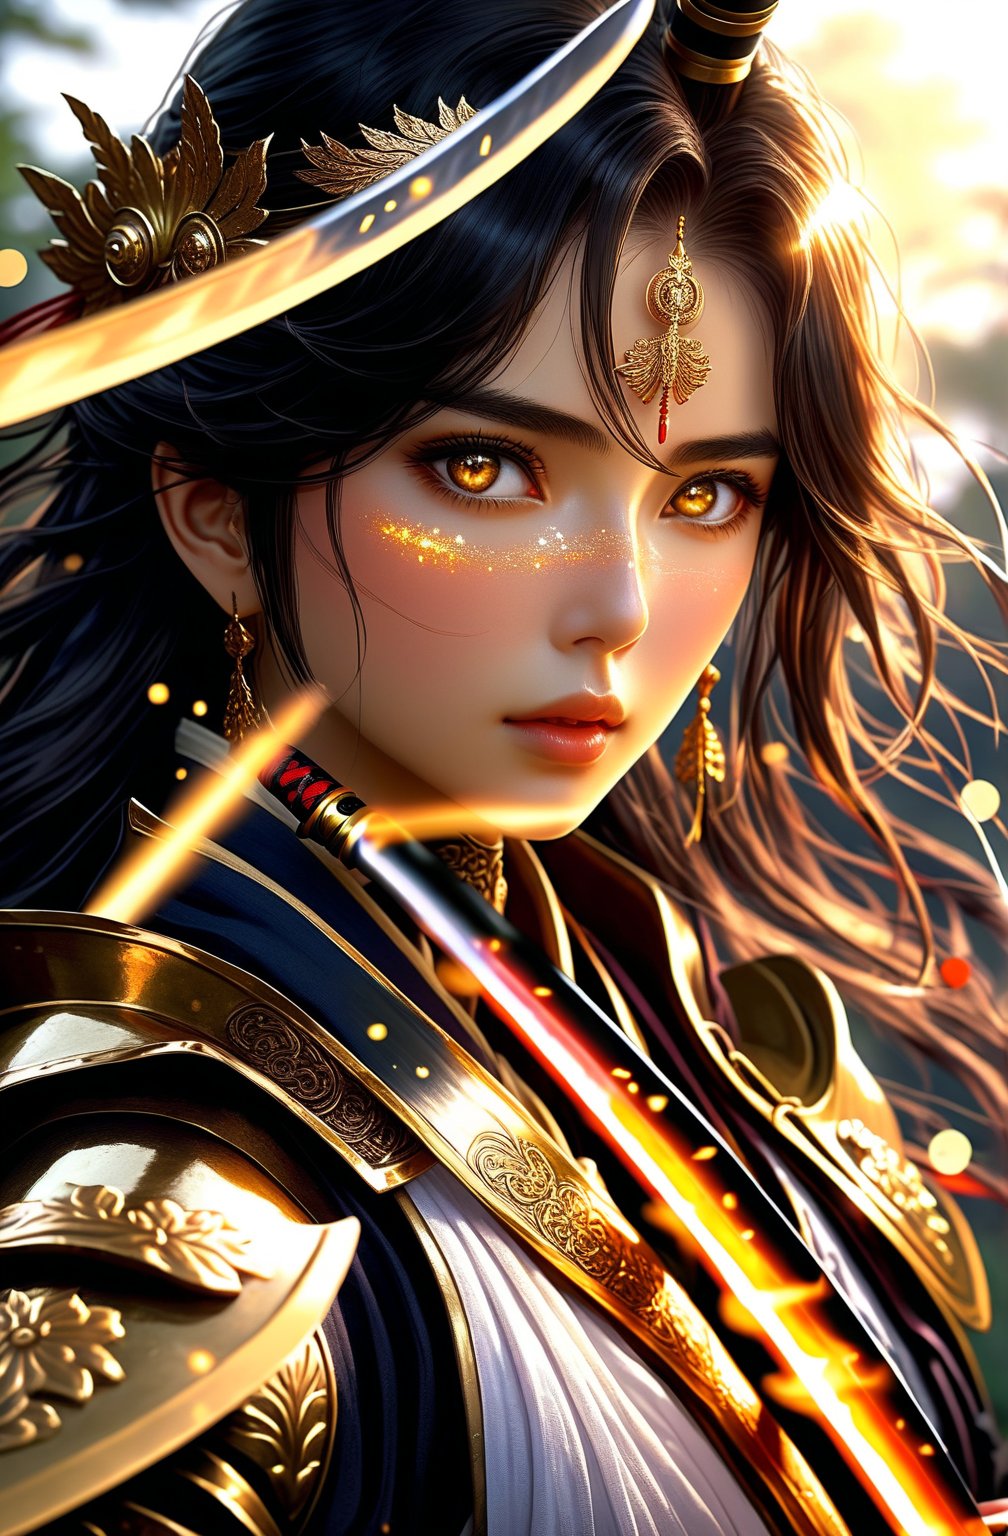 ((ufotable anime style)),(((Fete/ stay night))), ((2020's anime style)) , ((Japanese anime style)) , (Dark Souls 3) ~ ((Elden Ring )) ~ Sekiro~, (glowy eyes),holographic glow, light particles, hyperdetailed skin, 32k resolution, best quality, anime illustration,(anime digital artwork), ((anime screen cap)) , Understanding the perfect body structure, Draw the whole body precisely,defiant gaze shot on dslr camera , ultra detailed gorgeous, most beautiful war goddess woman with dark gray medium long hair and gold eyes, highly armored. blushing, teasing, Alluring, standing in the battle field. highly stylized. depth of field, bokeh effect, backlit, stylish, elegant, breathtaking, visually rich, masterpiece full body shot,hold a black katana,swords master




,Insta Model